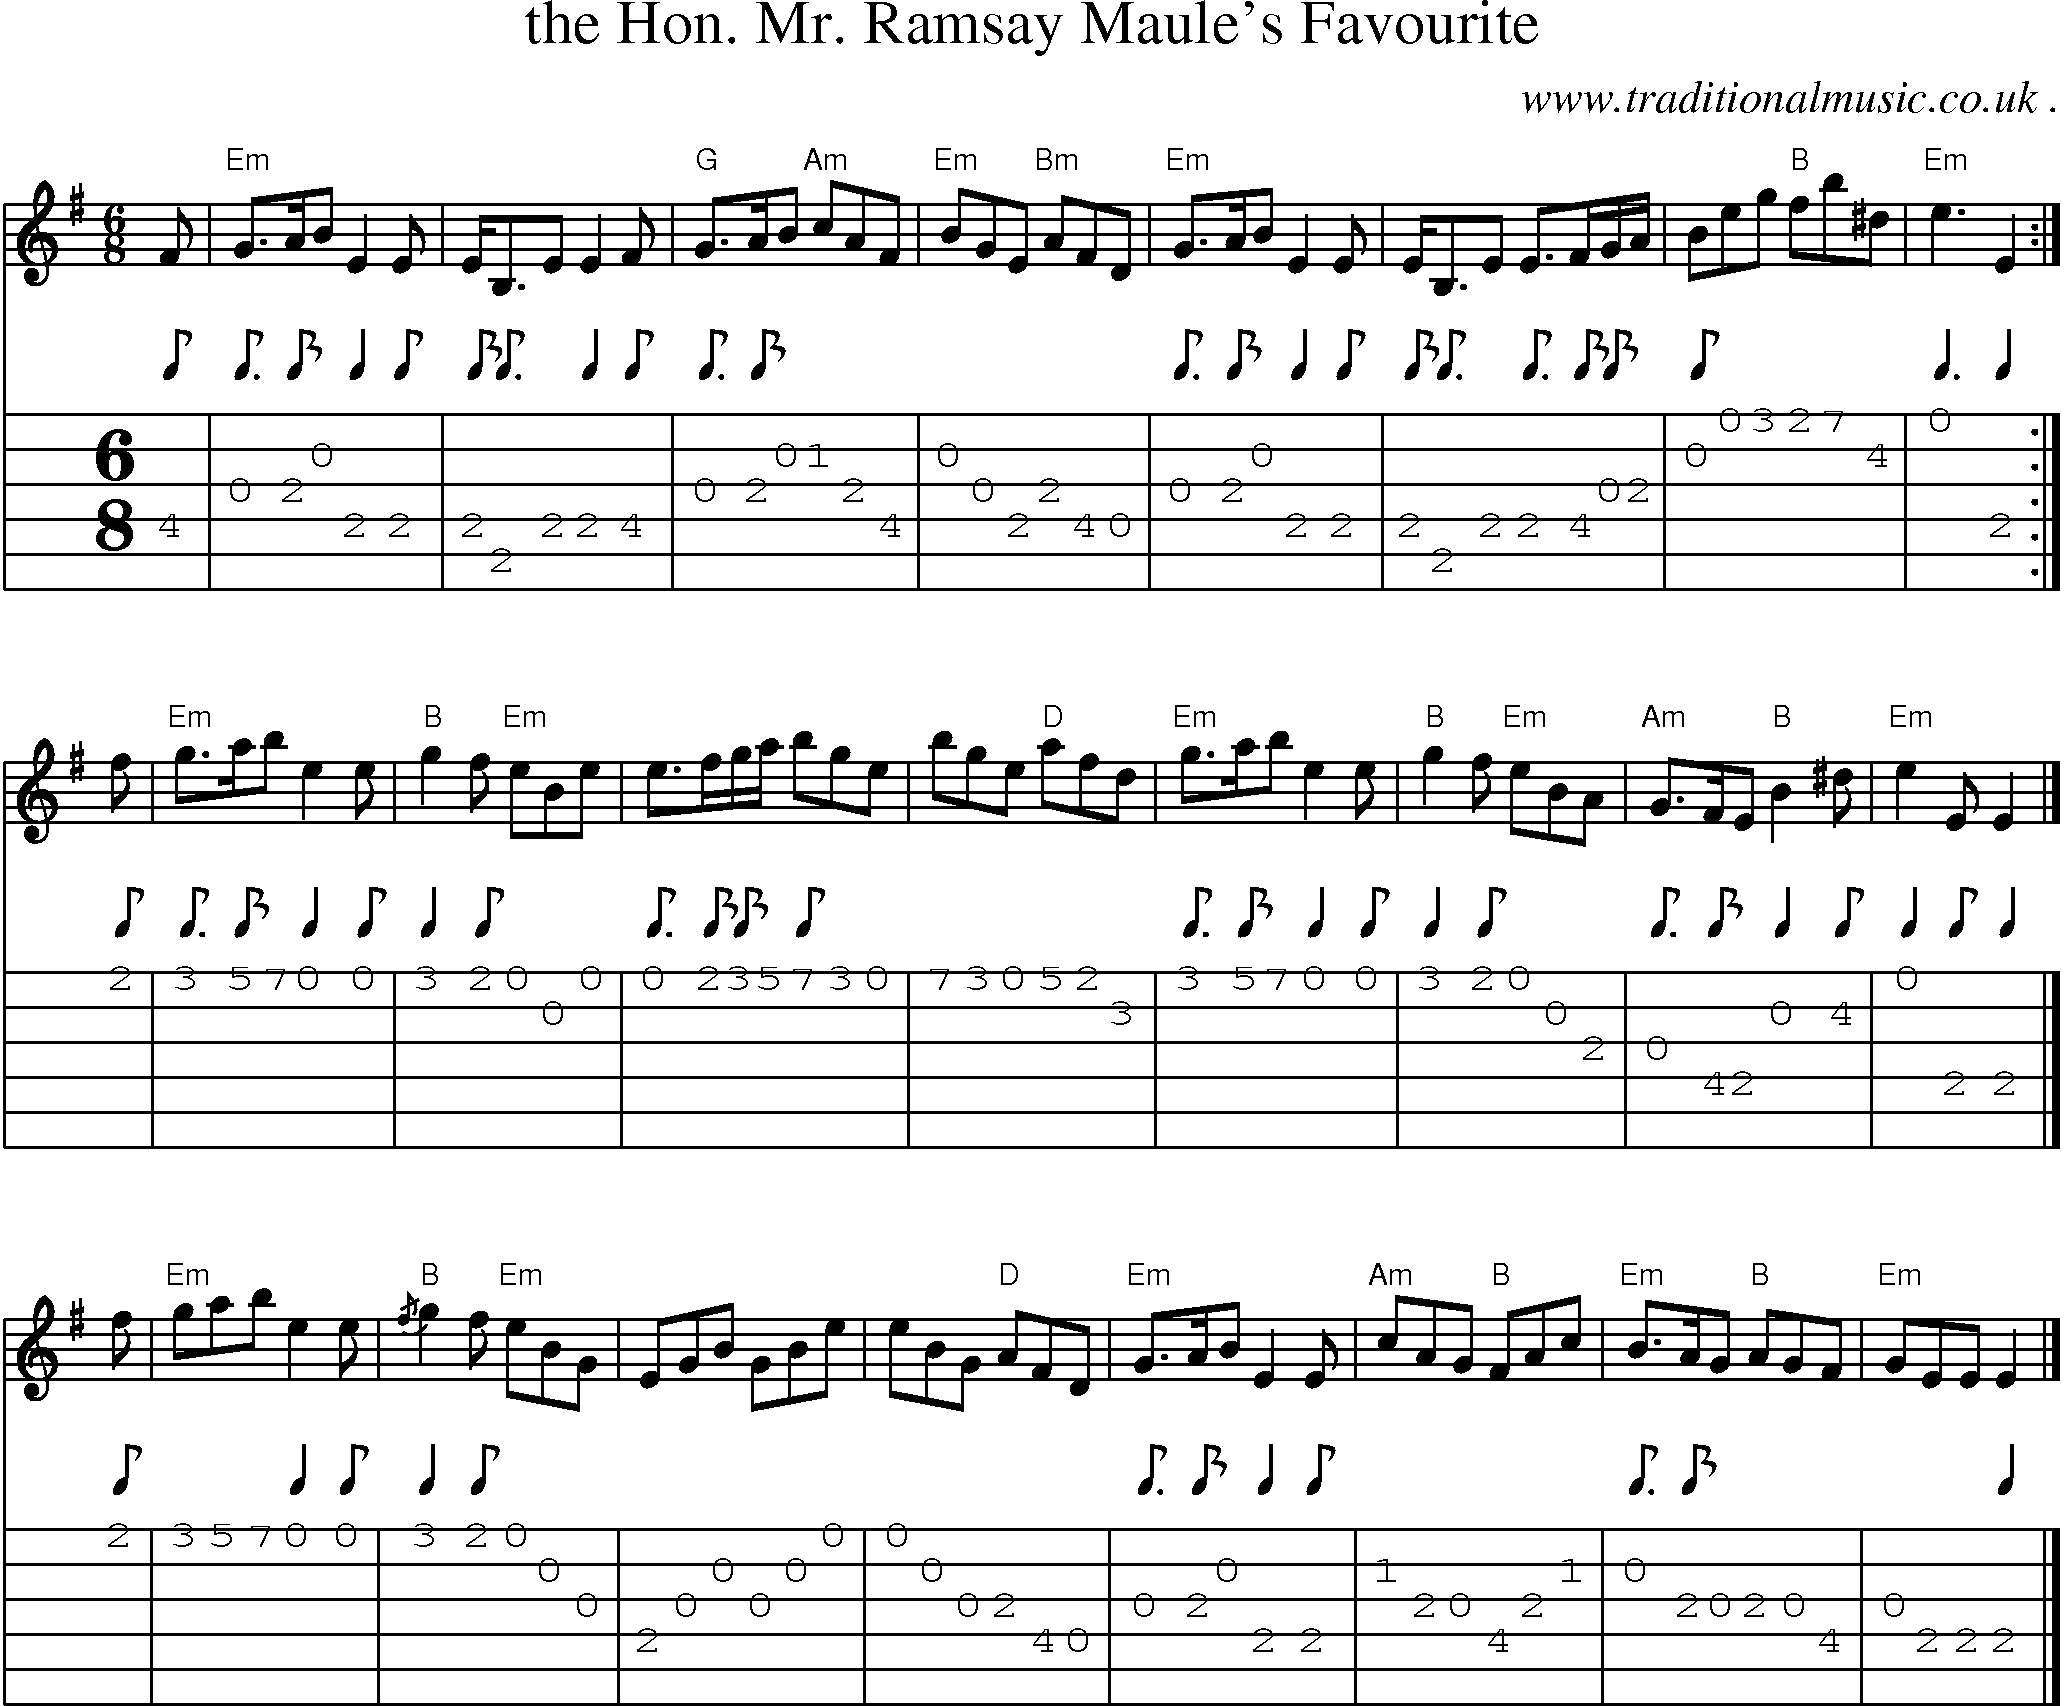 Sheet-music  score, Chords and Guitar Tabs for The Hon Mr Ramsay Maules Favourite